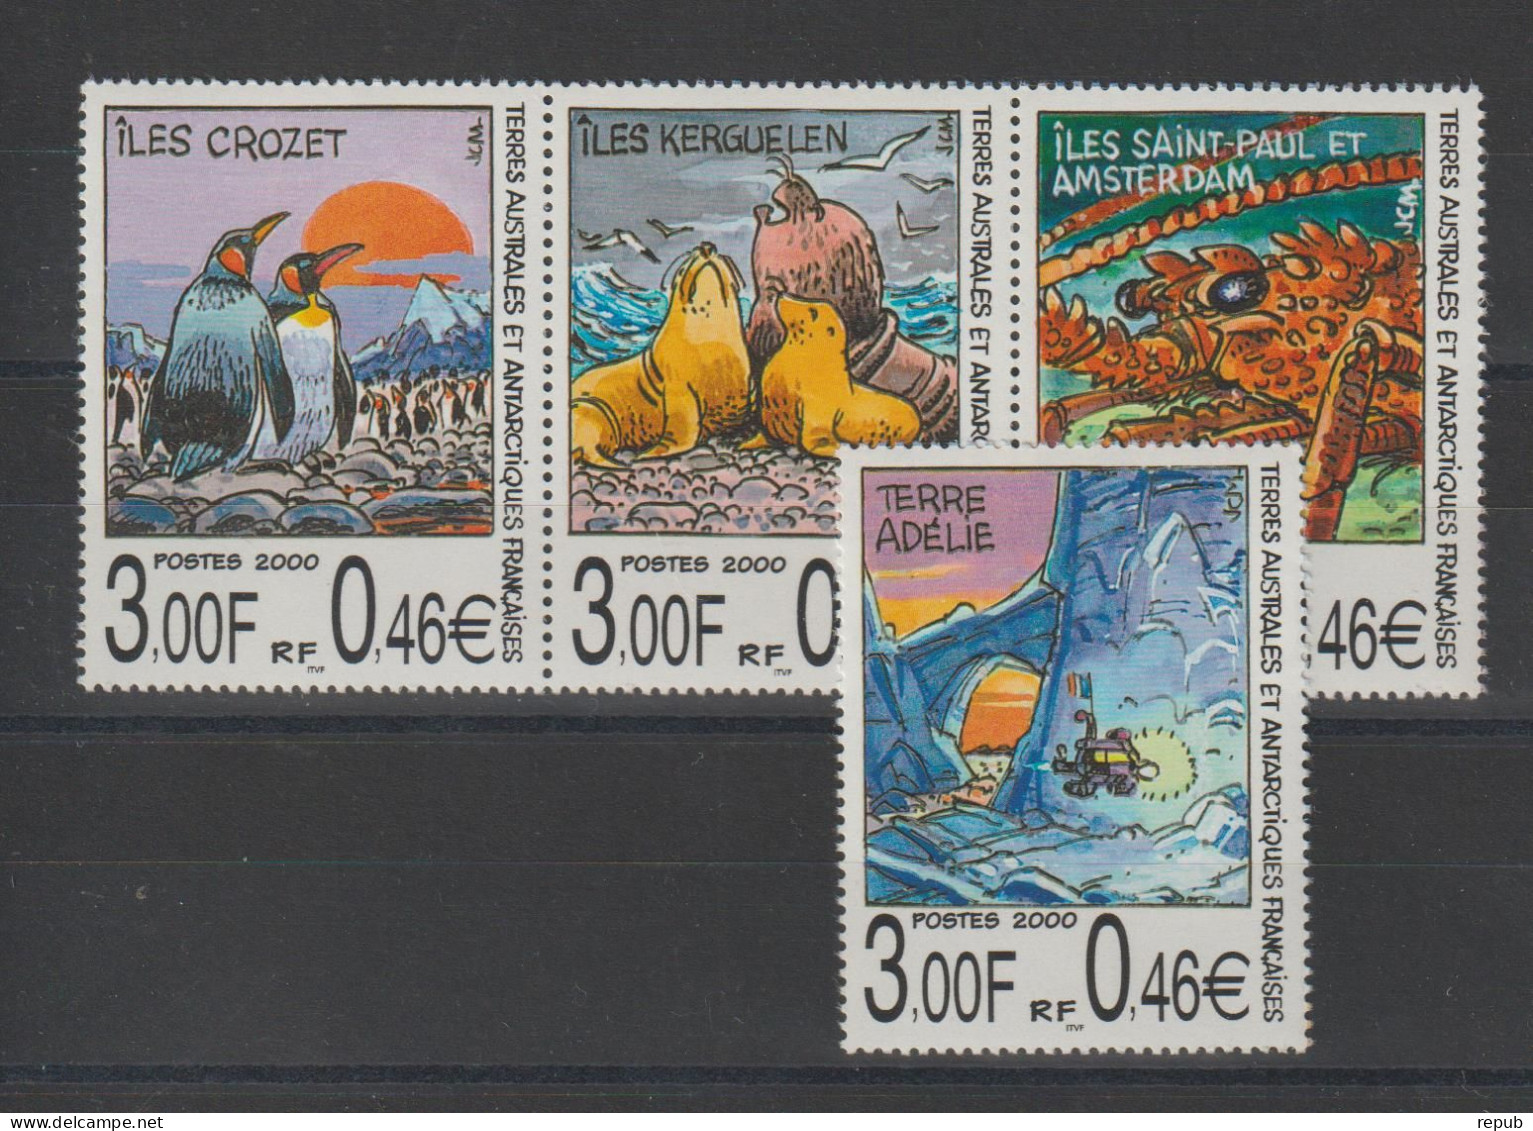 TAAF 2000 Timbres Issus Du BF 4, 281-284, 4 Val ** MNH - Neufs